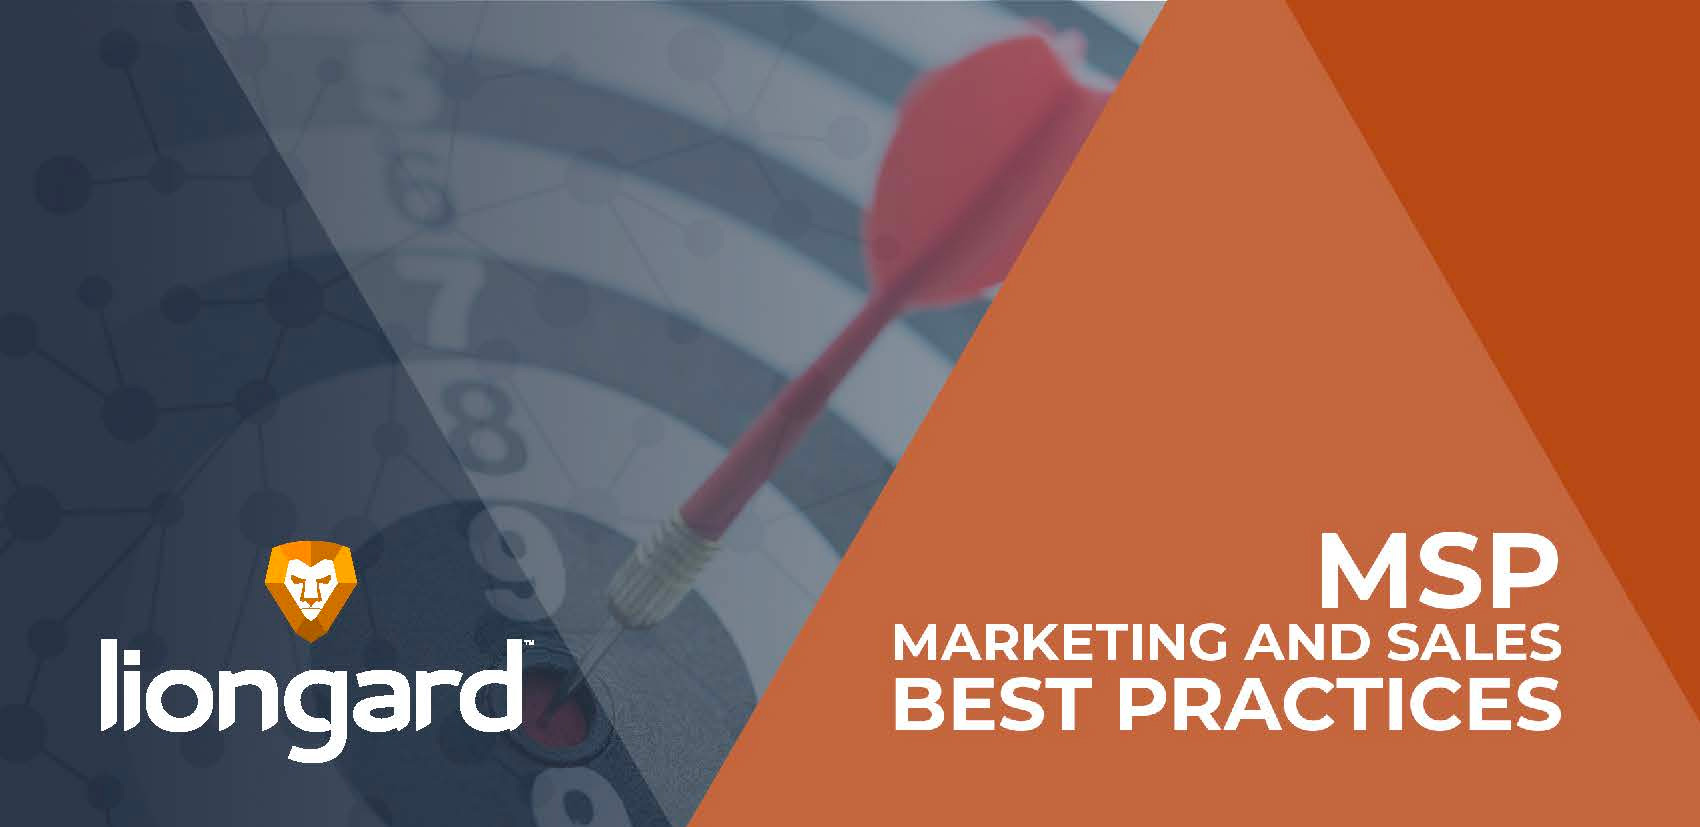 MSP Marketing and Sales Best Practices